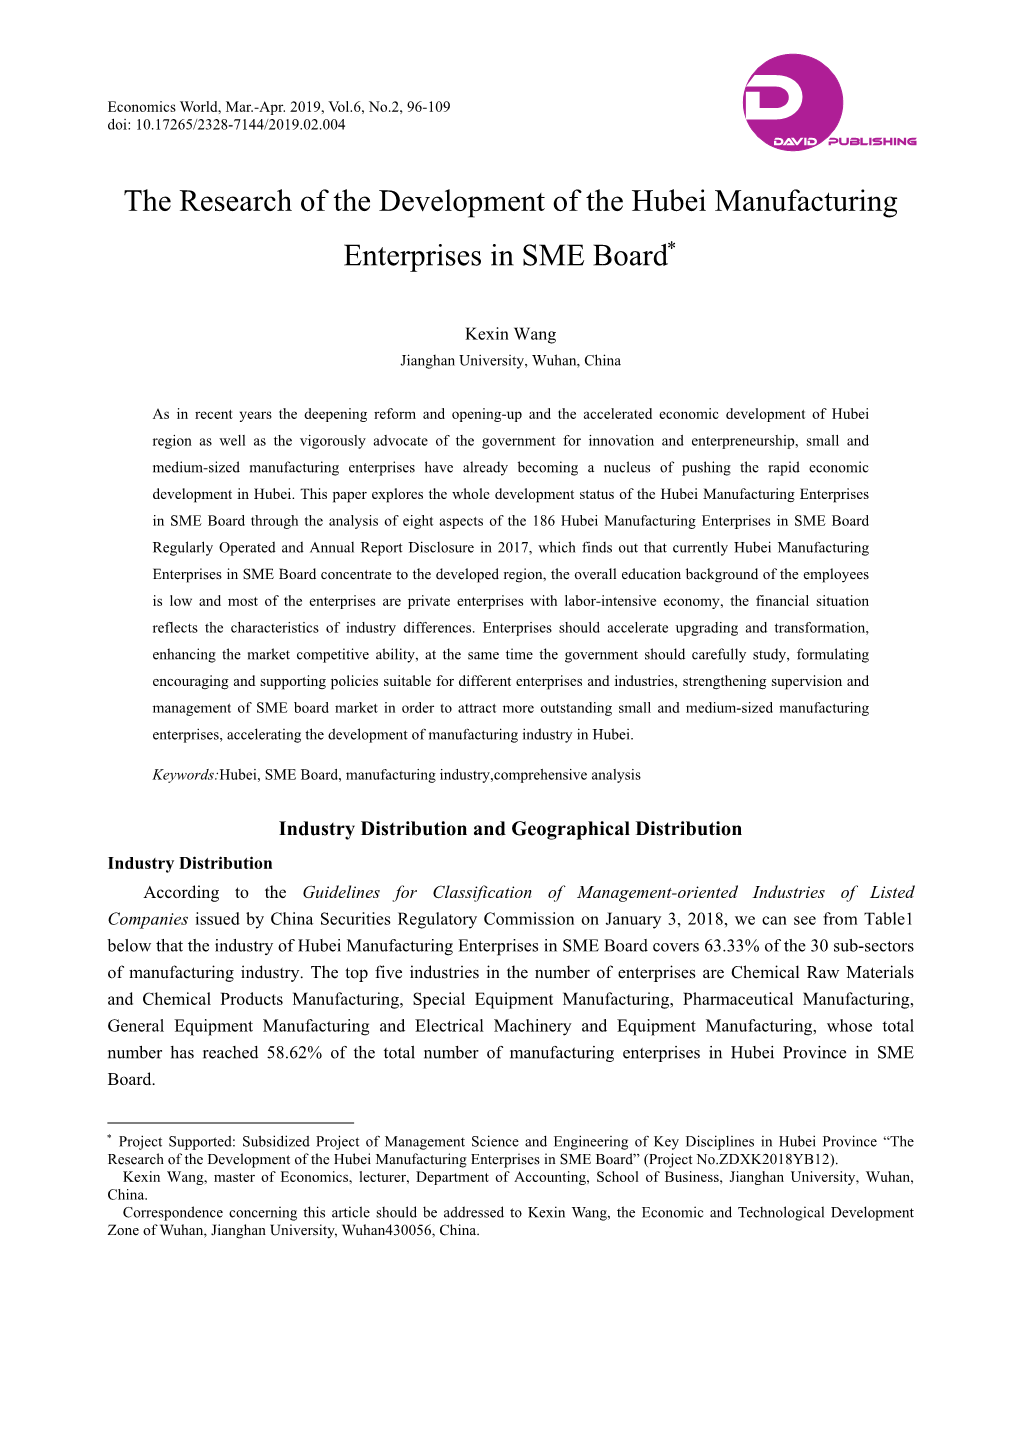 The Research of the Development of the Hubei Manufacturing Enterprises in SME Board